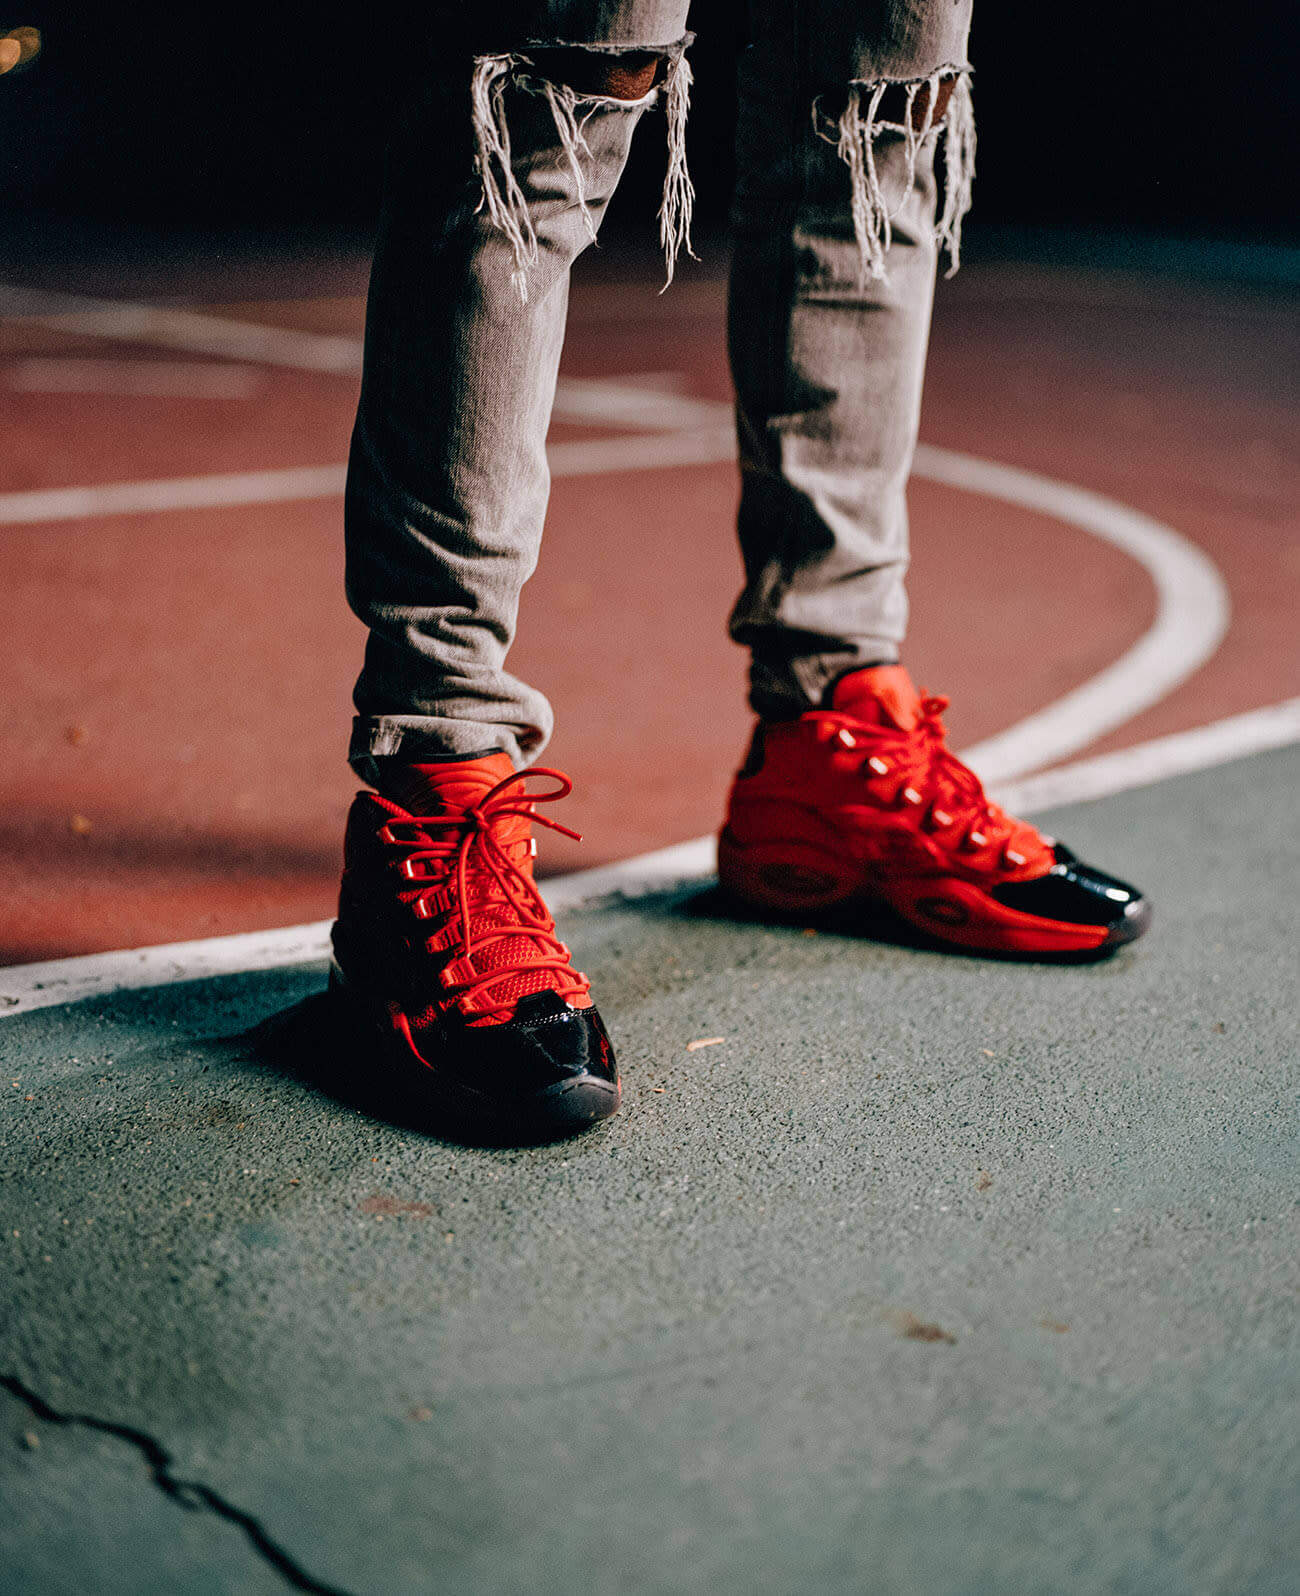 reebok question mid all red